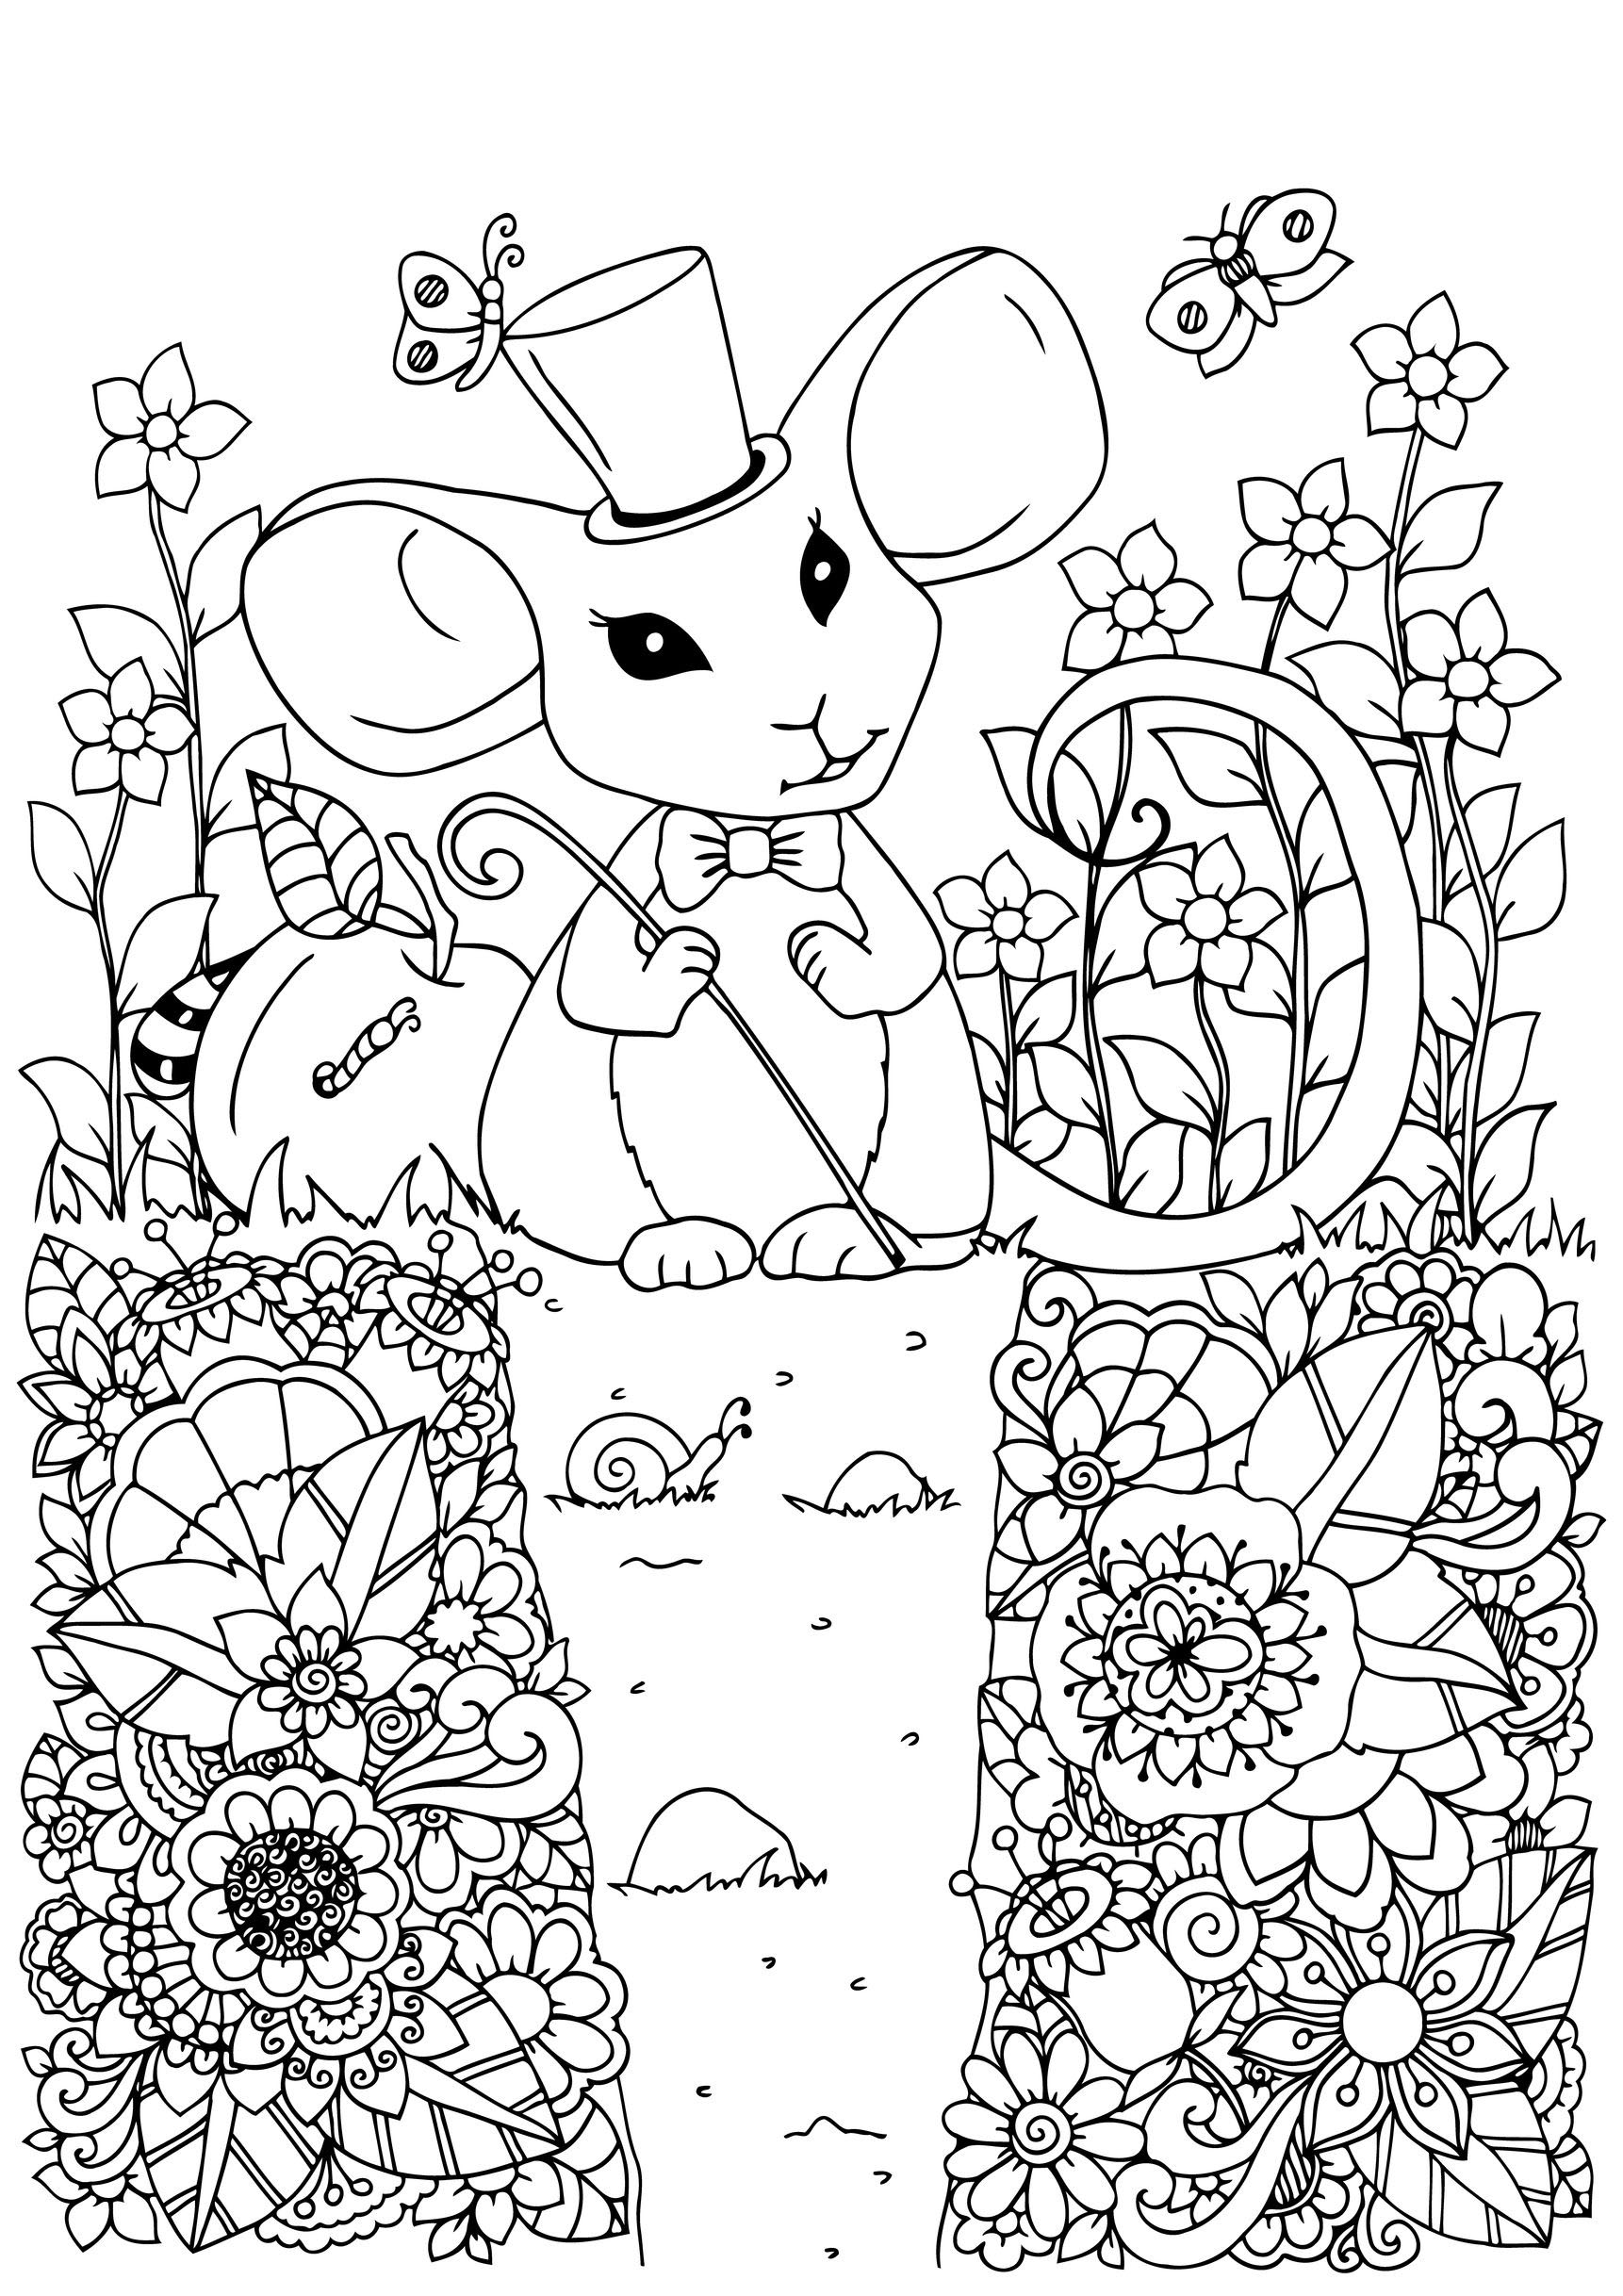 Cute mouse with her magician hat in a garden full of beautiful flowers